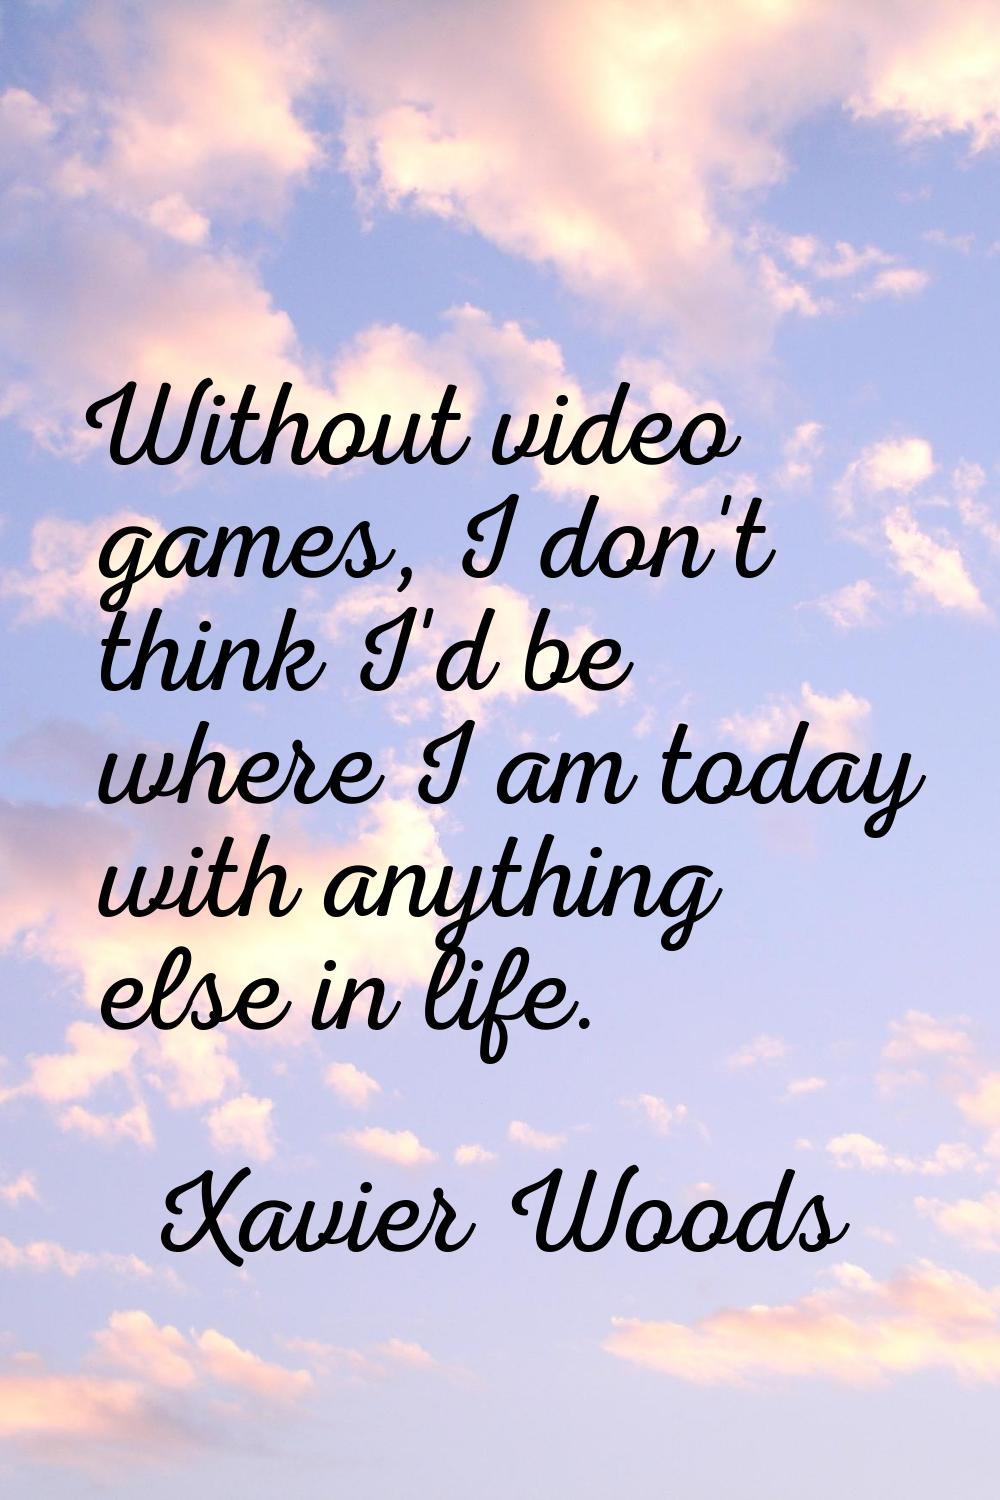 Without video games, I don't think I'd be where I am today with anything else in life.